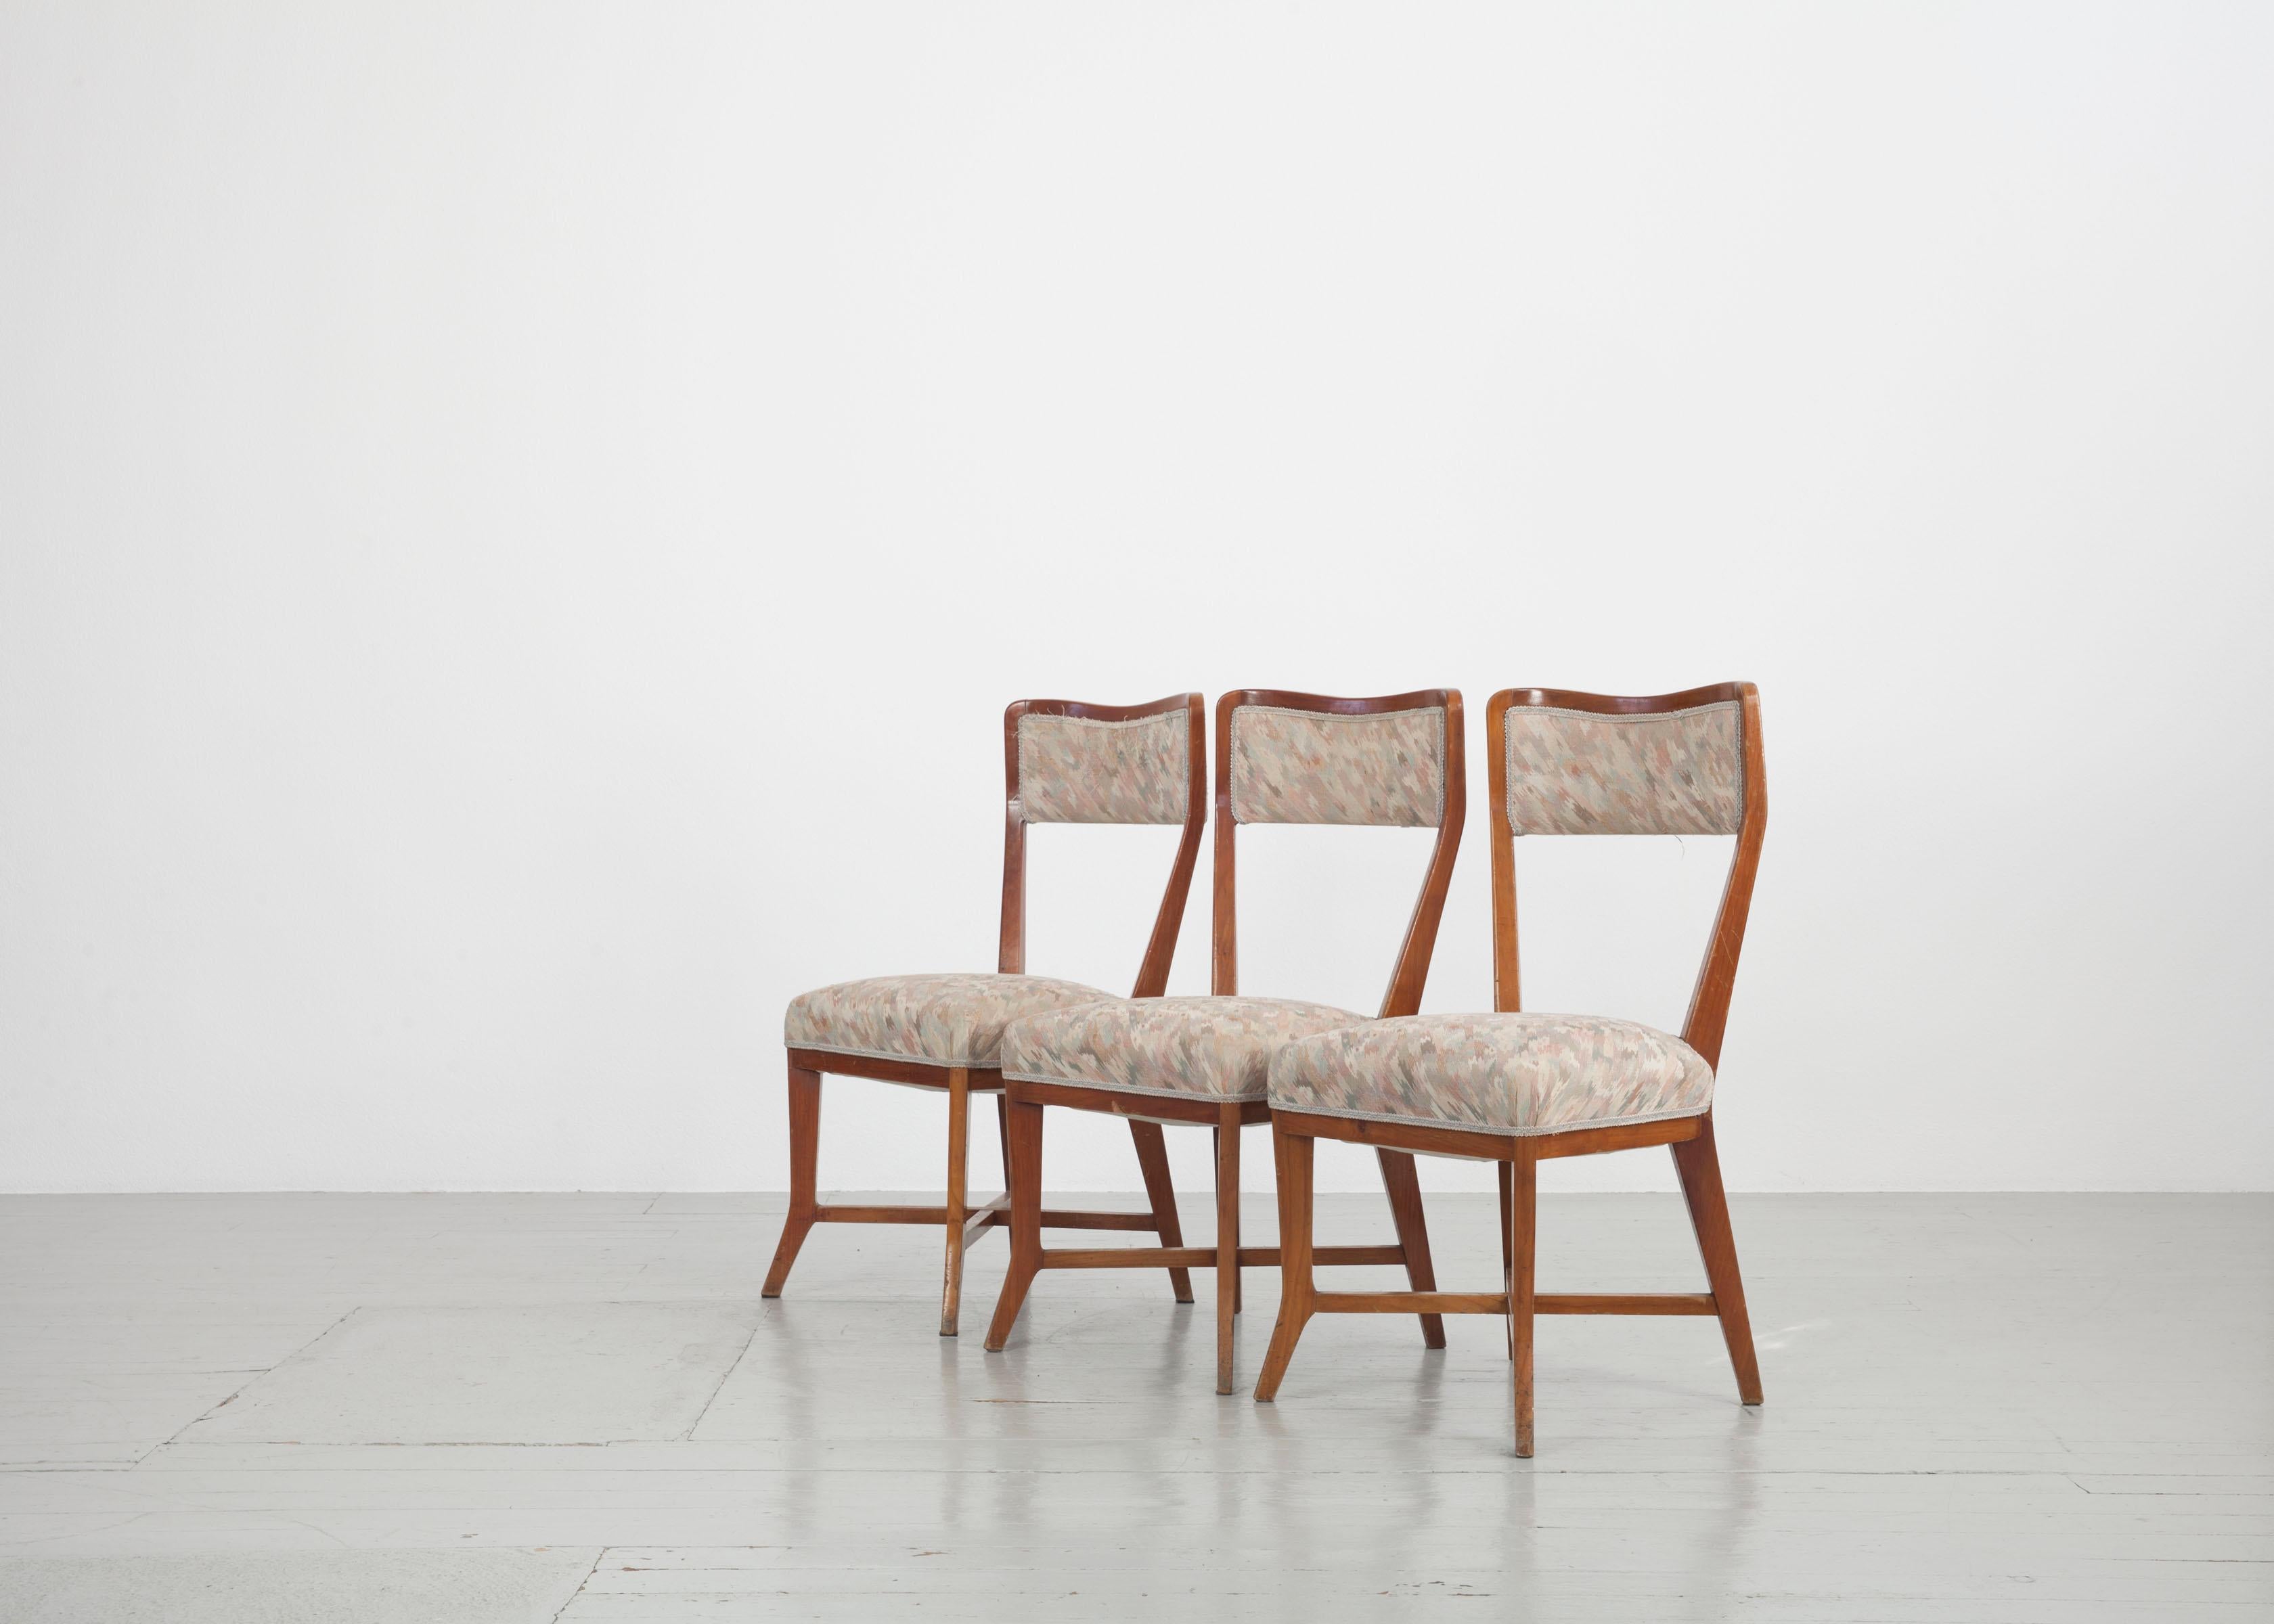 Set of 6 Melchiorre Bega Chairs Made of Cherrywood, Italy, 1950s For Sale 4